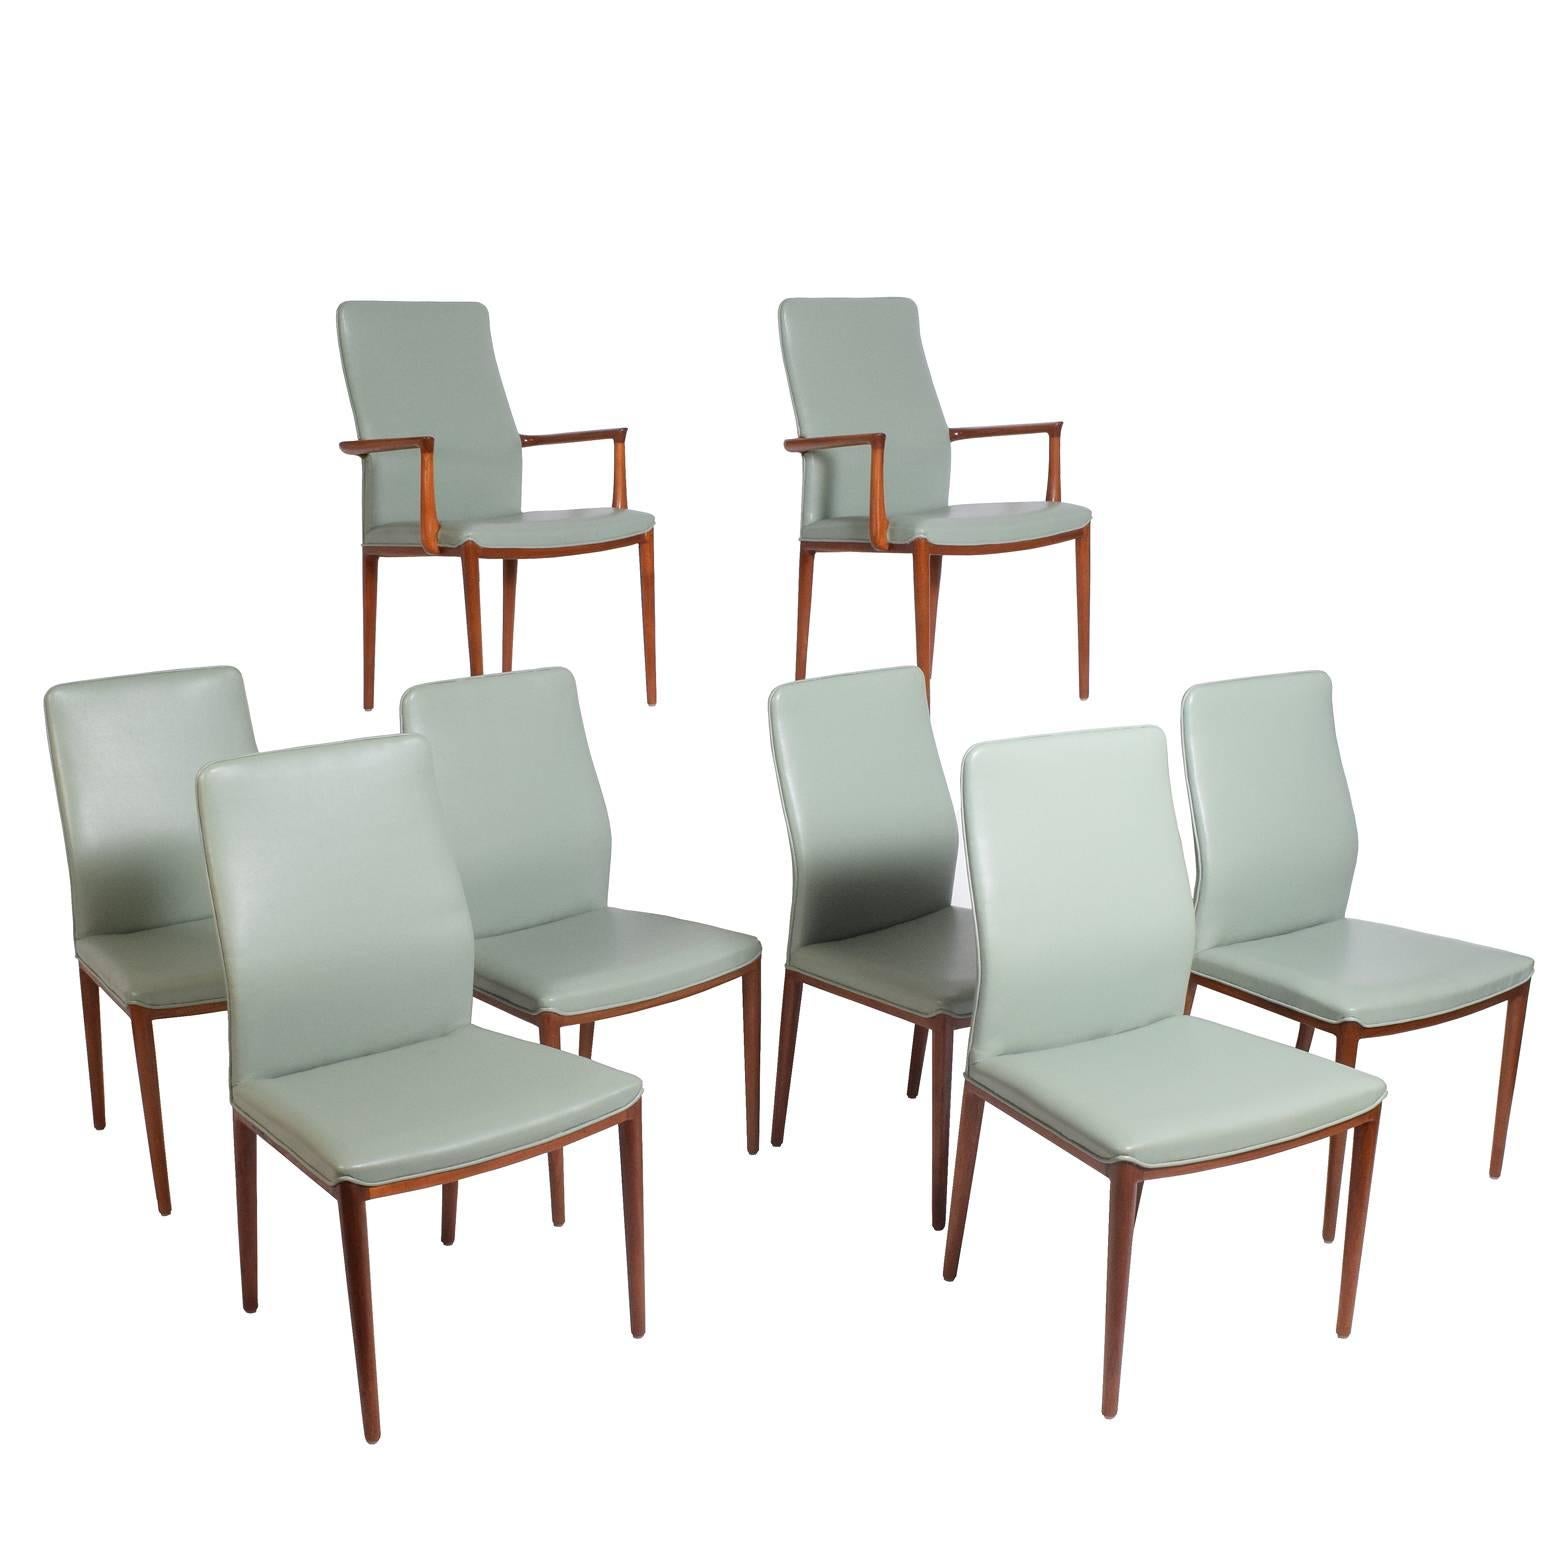 Two armed and six side dining chairs made of solid teak and leatherette upholstery. Designed for formal dining with wonderful back support.